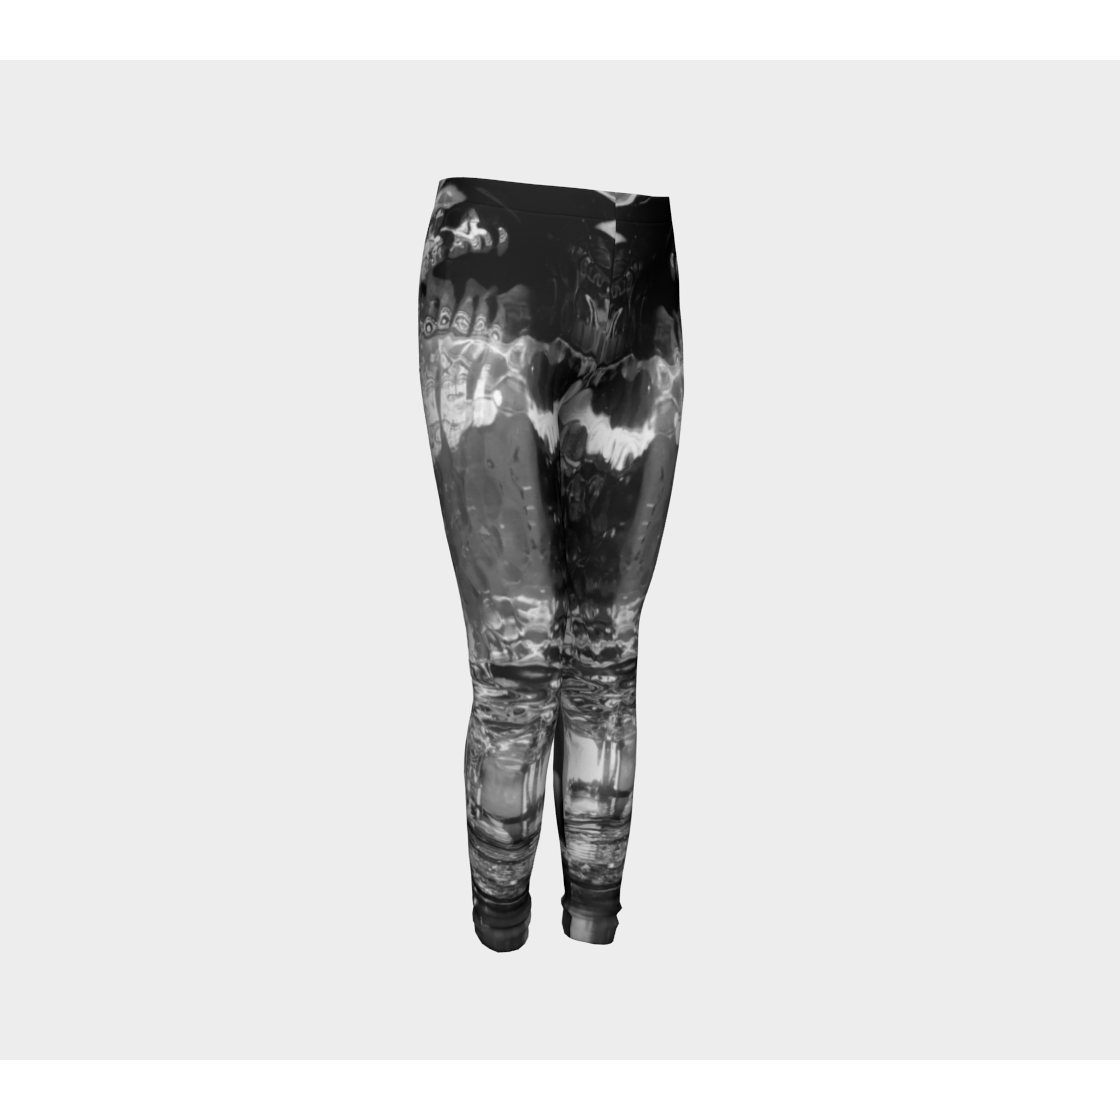 Youth Leggings for girls with: Water Glass Design, 6-7 front